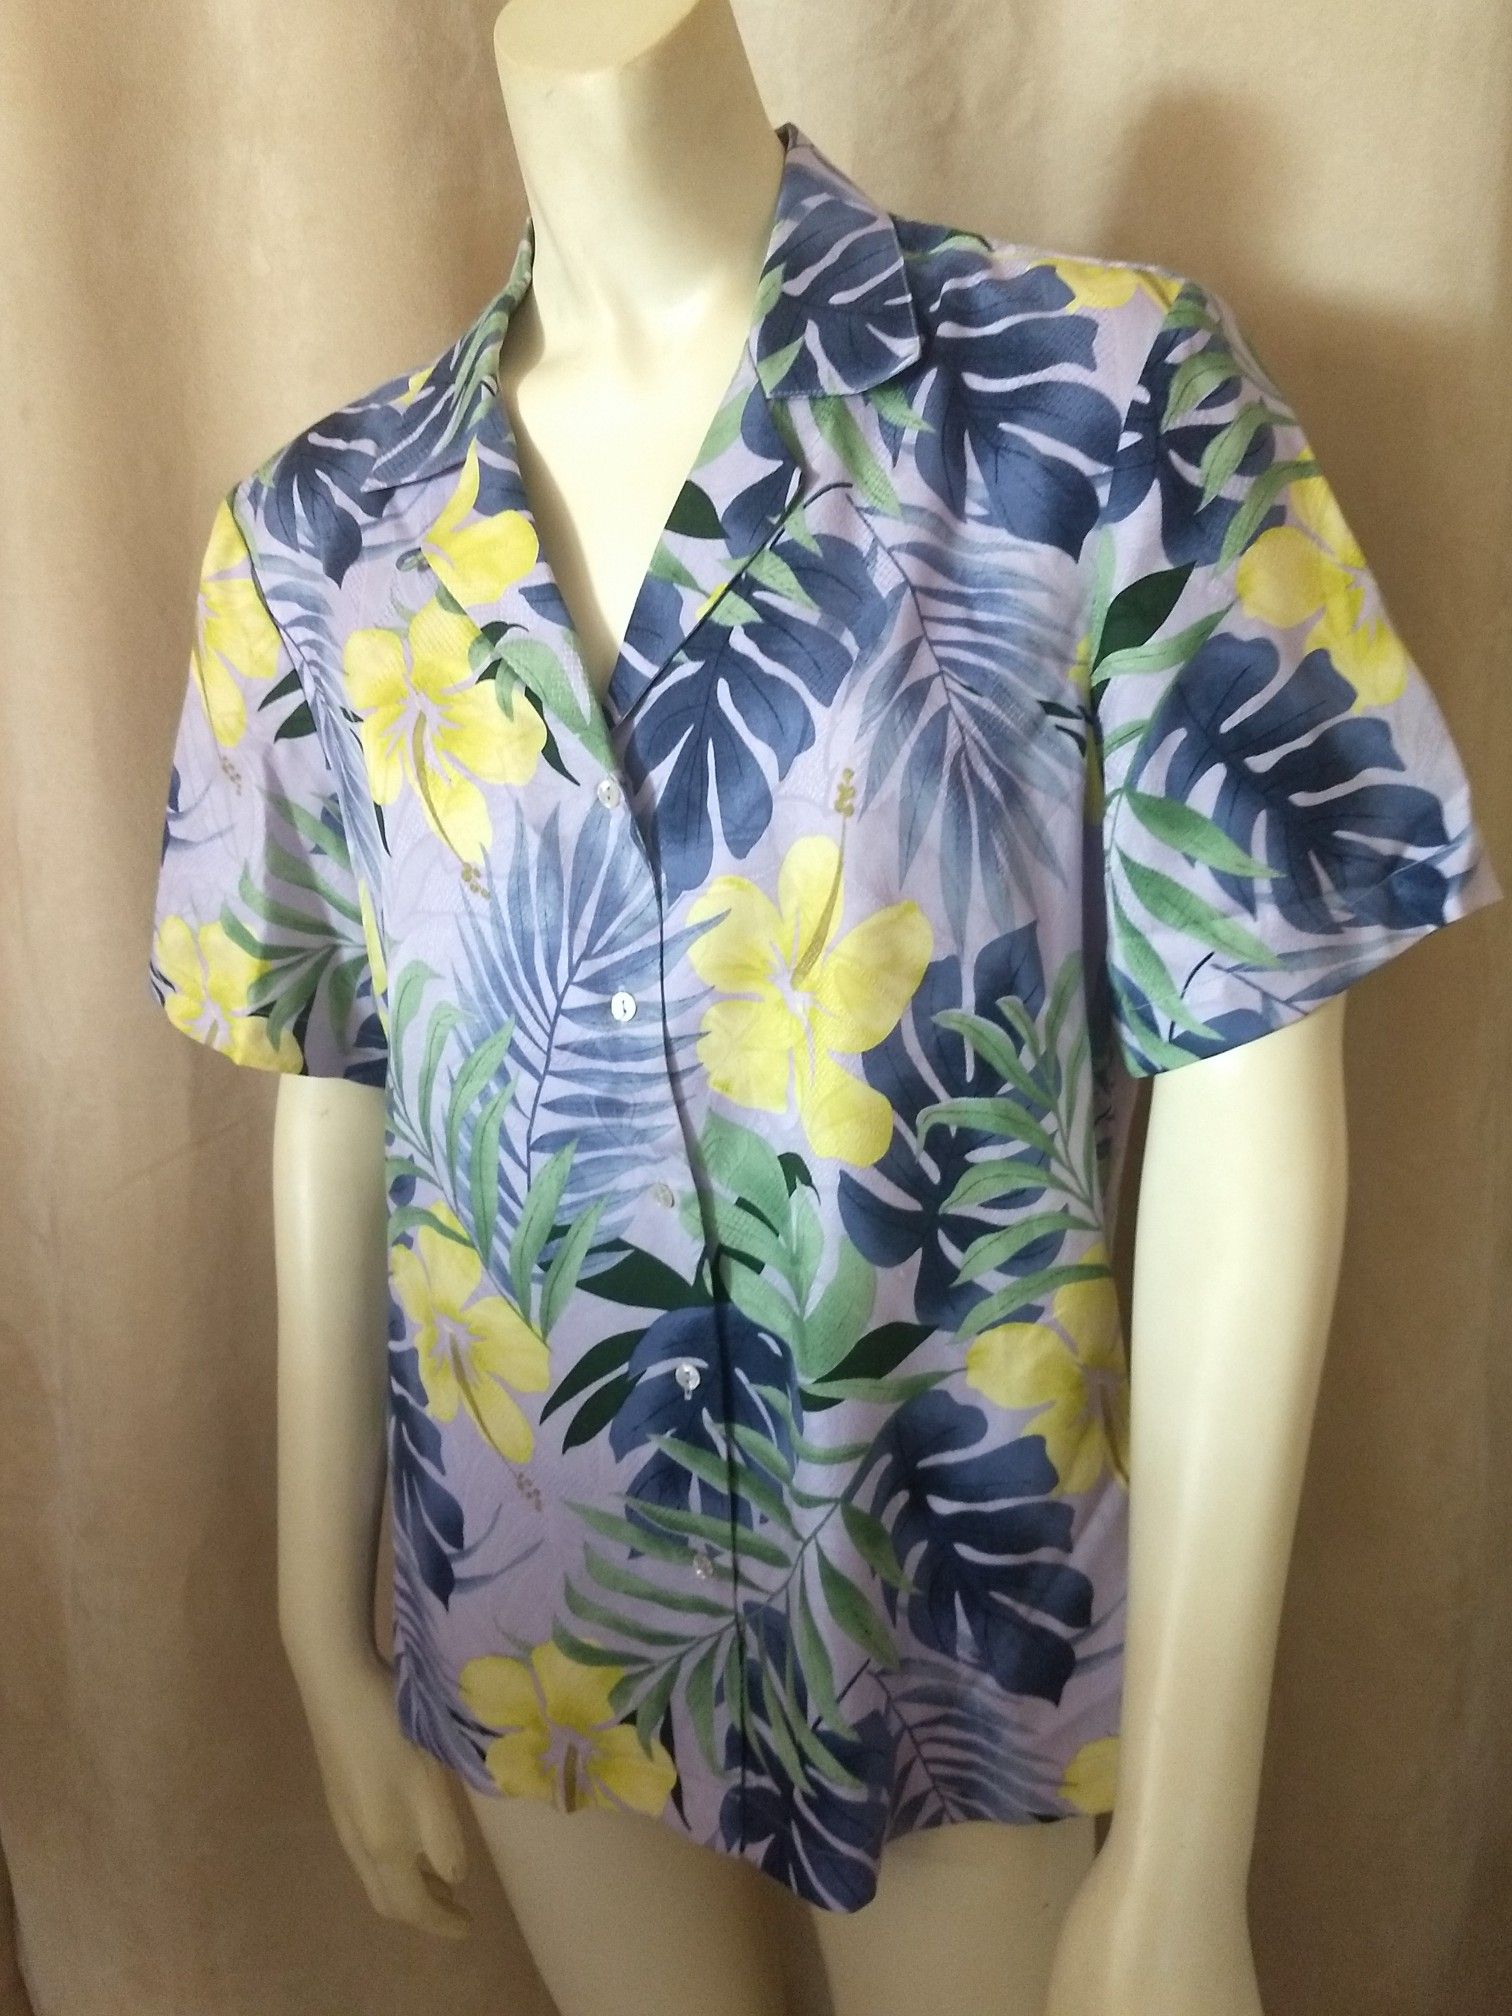 TOMMY BAHAMA Women's 100% Silk Shirt Top Blouse Button Down Floral Size Large